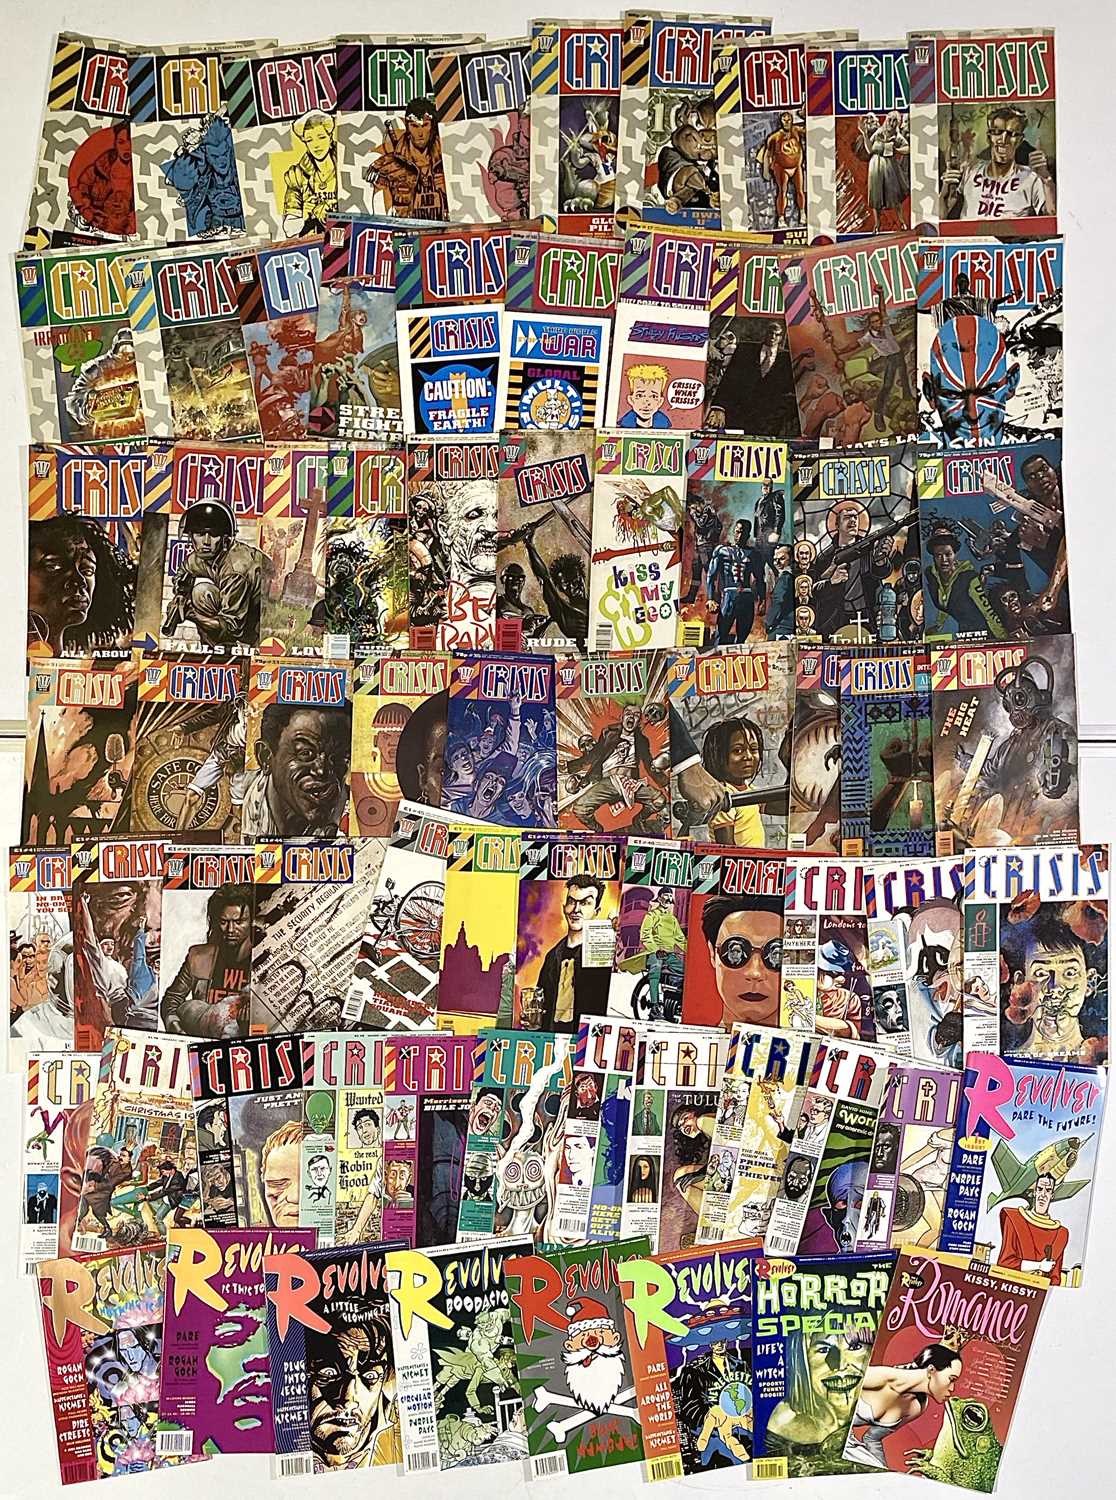 LARGE COLLECTION - 2000AD COMICS. - Image 3 of 6